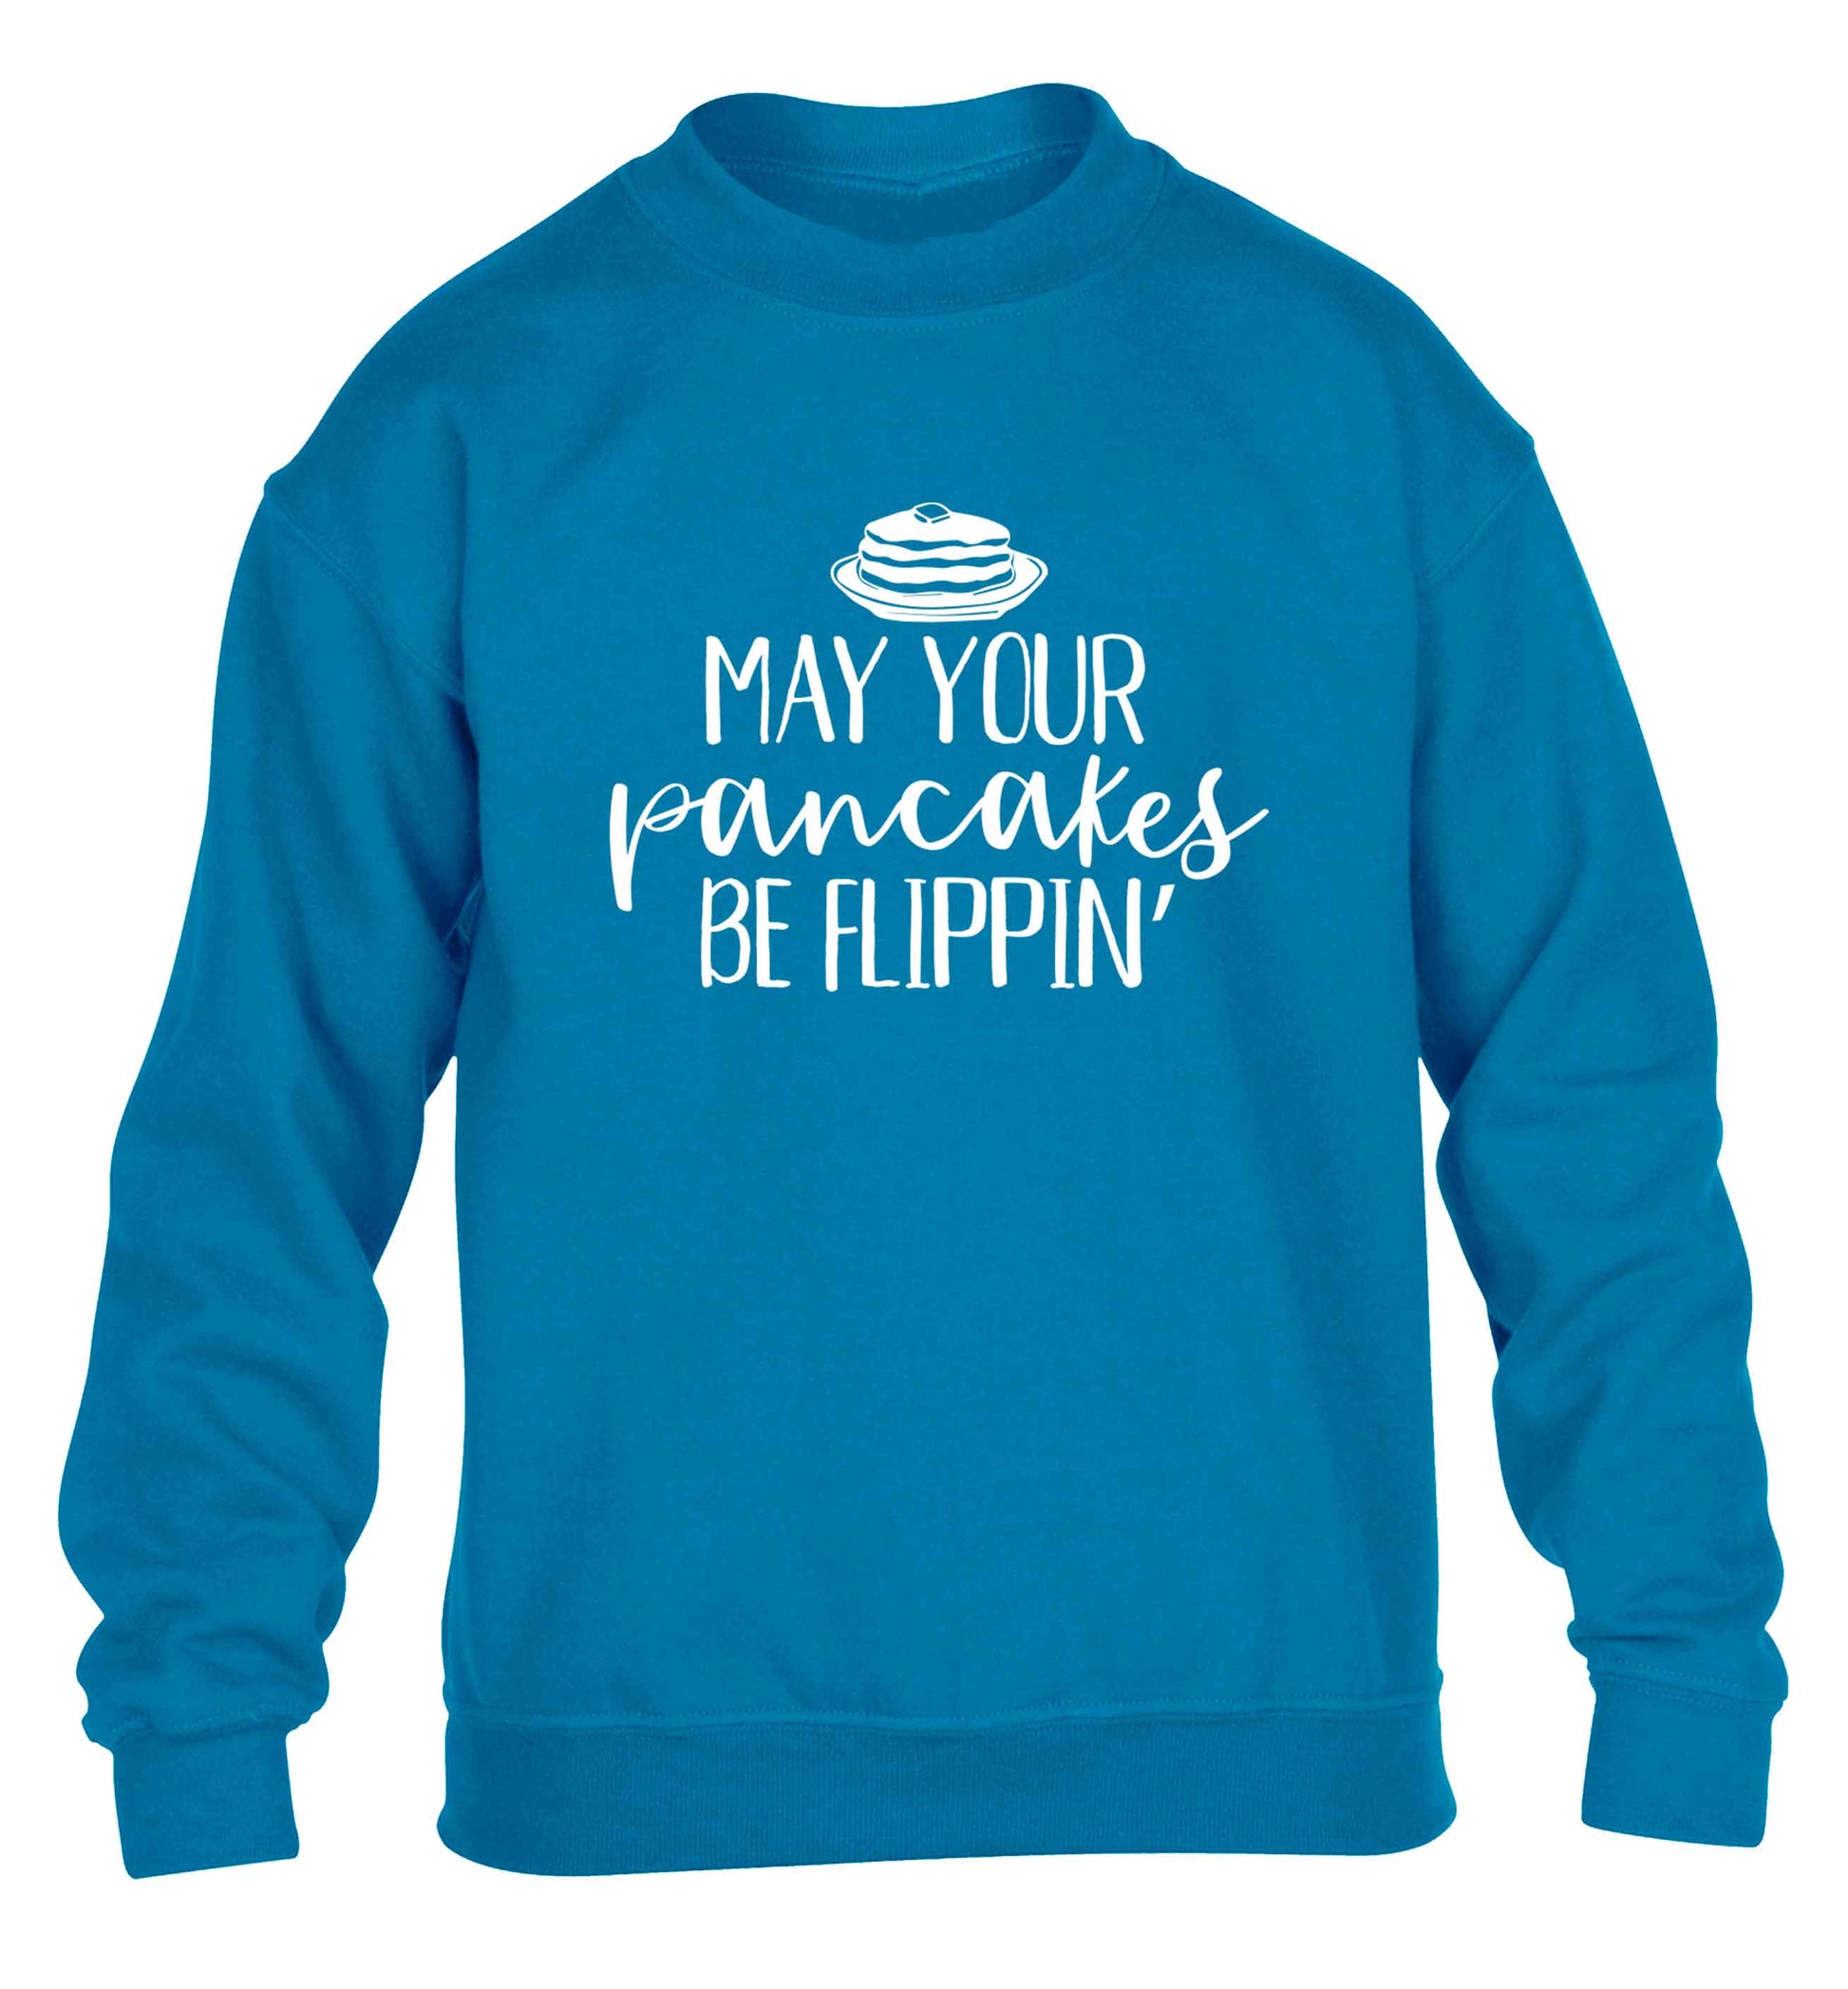 May your pancakes be flippin' children's blue sweater 12-13 Years